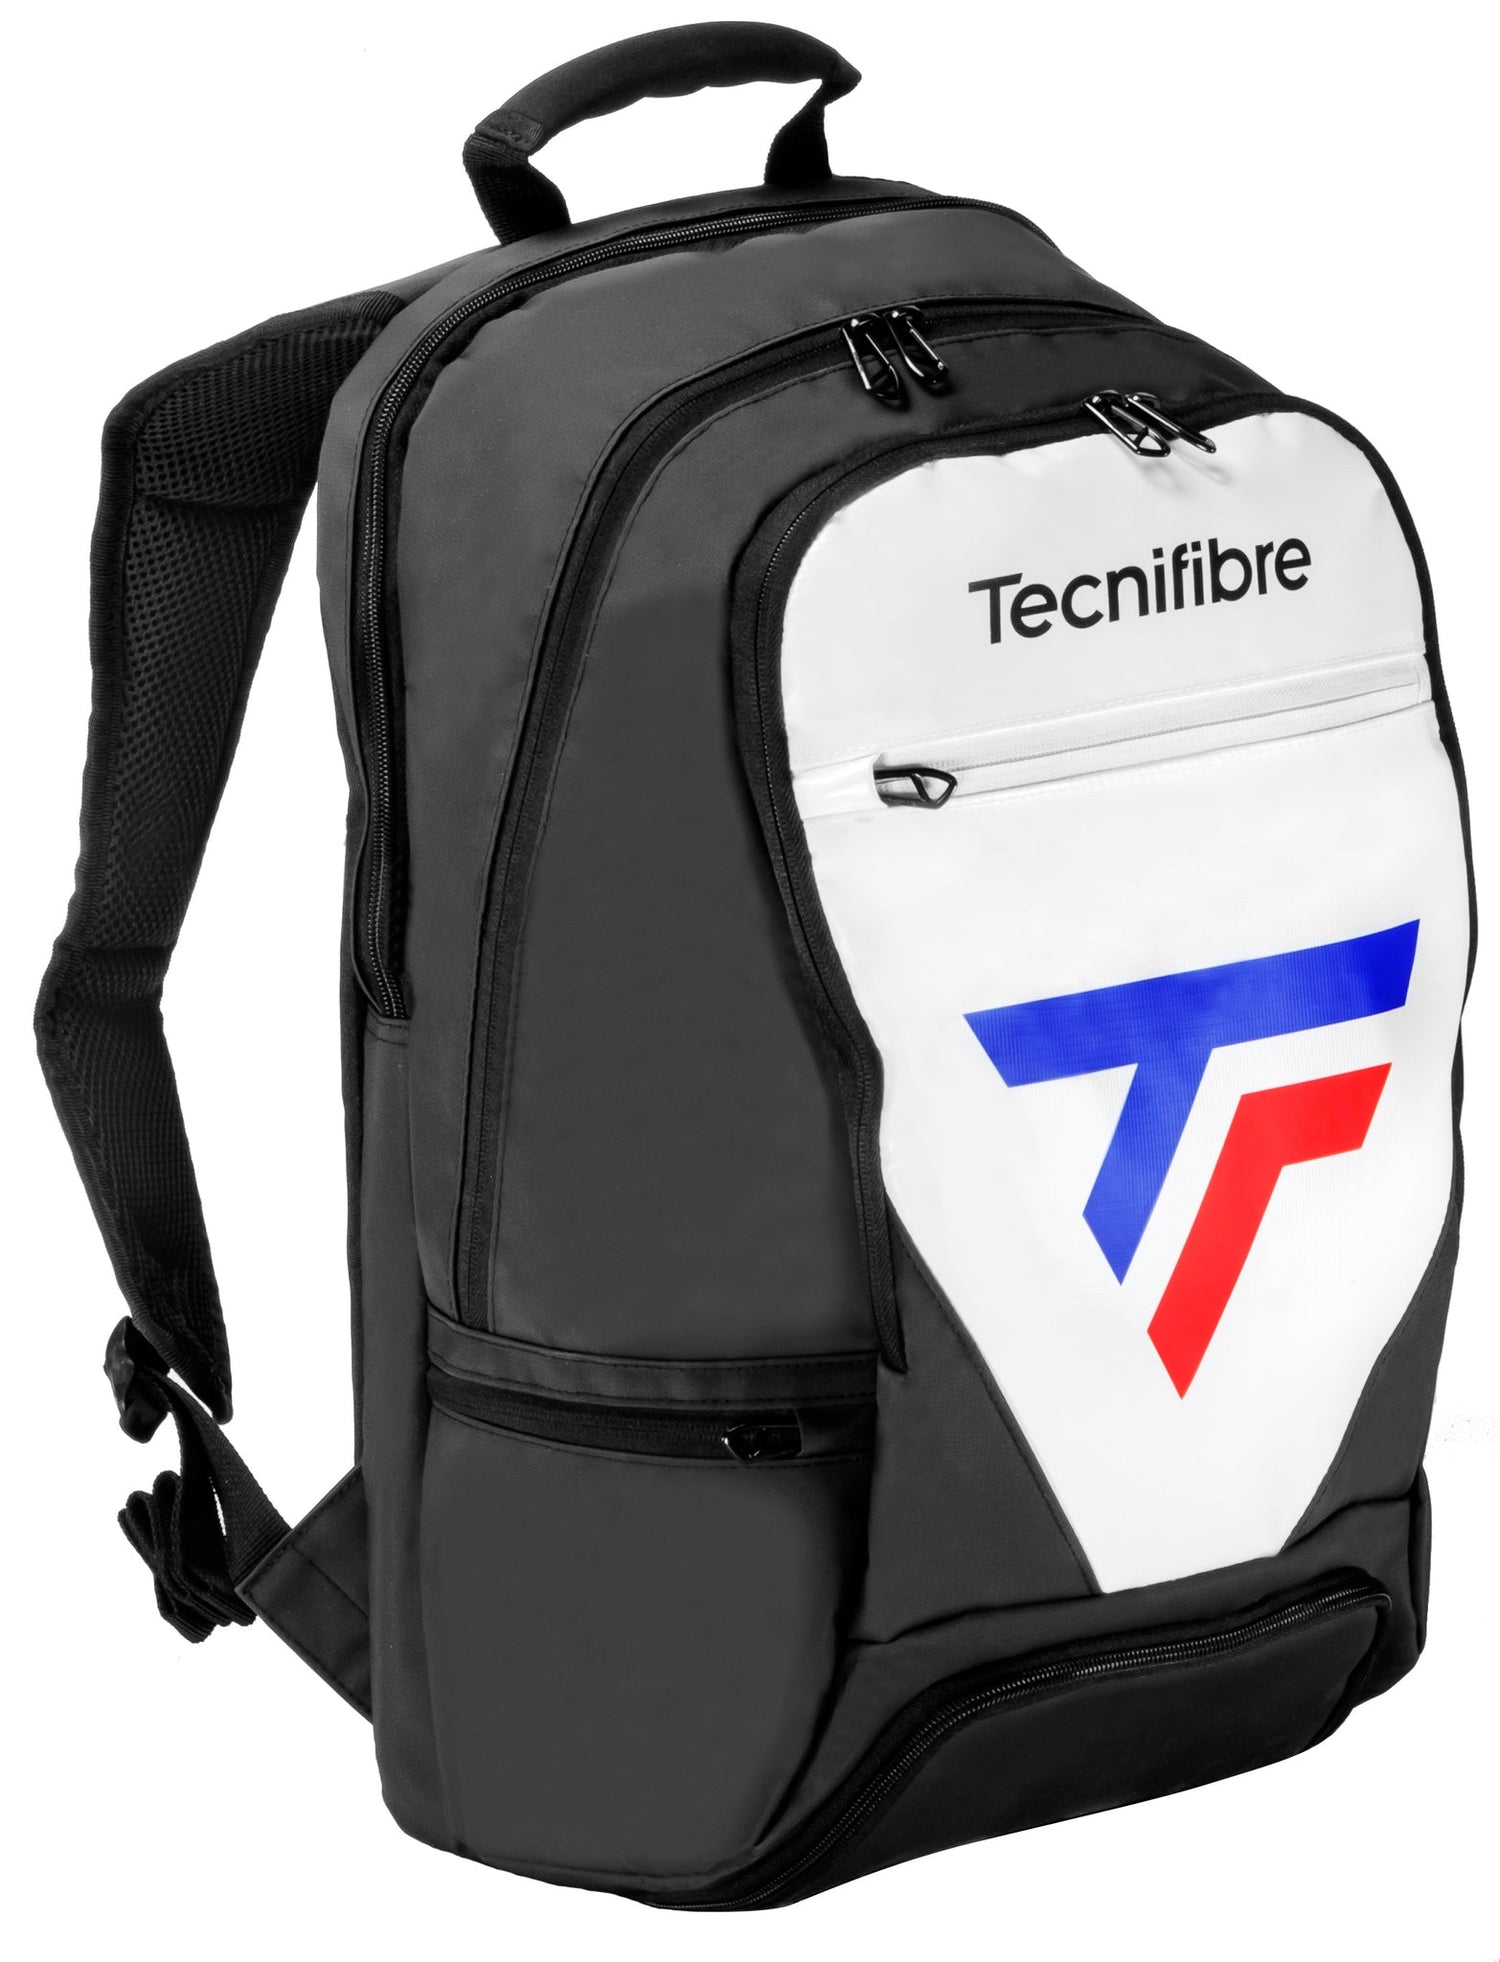 The waterproof Tarpaulin material of the Tecnifibre Tour Endurance WHT Backpack